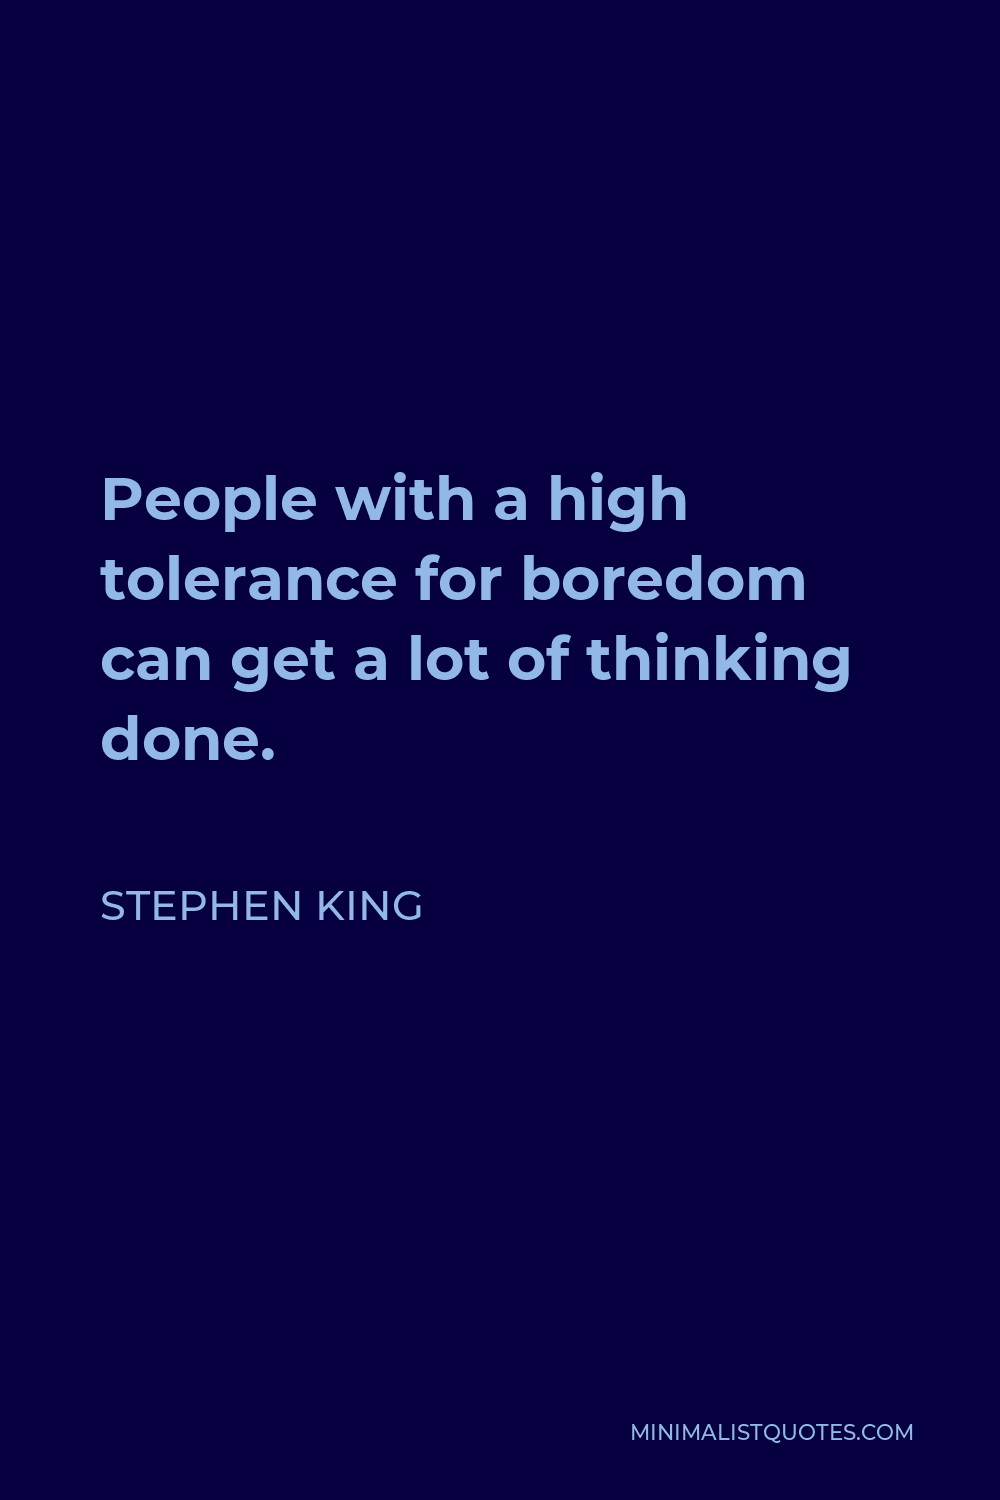 Stephen King Quote - People with a high tolerance for boredom can get a lot of thinking done.